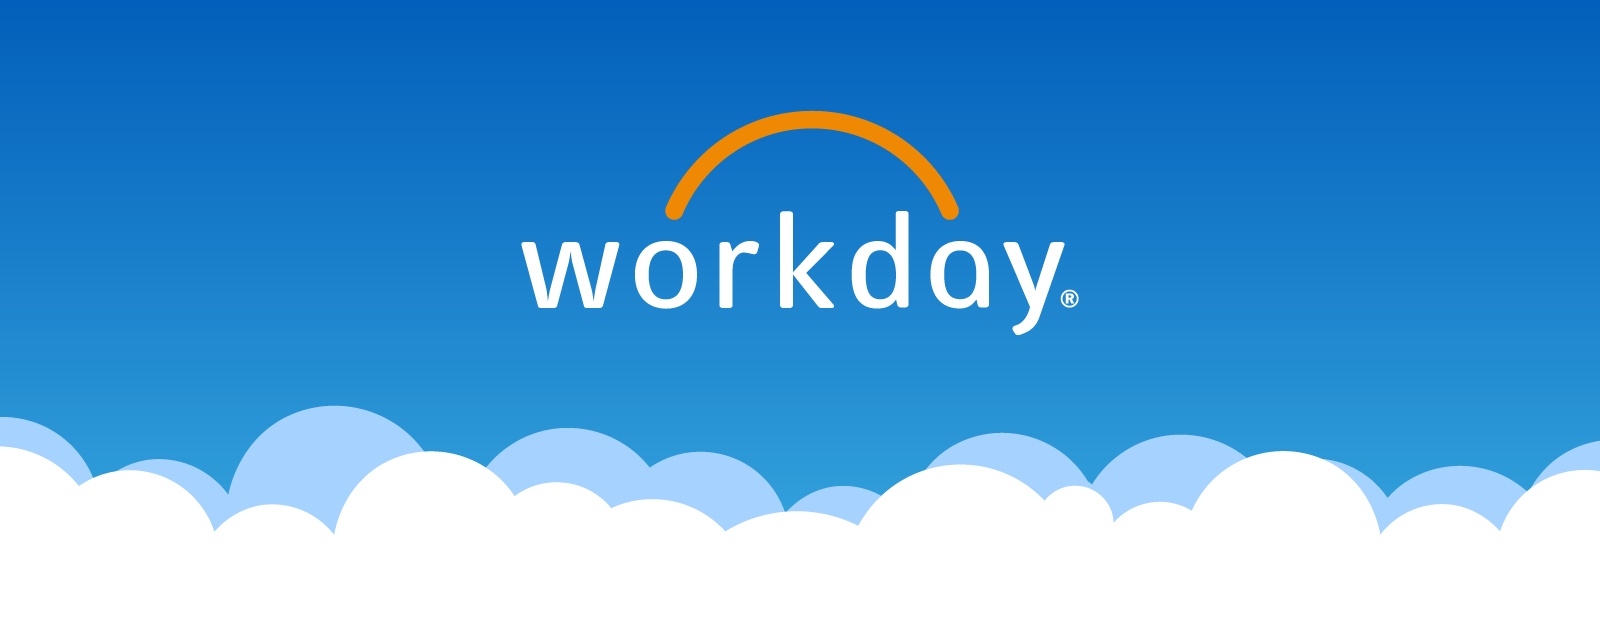 MyHR Workday - Workday HR System Login At community.workday.com